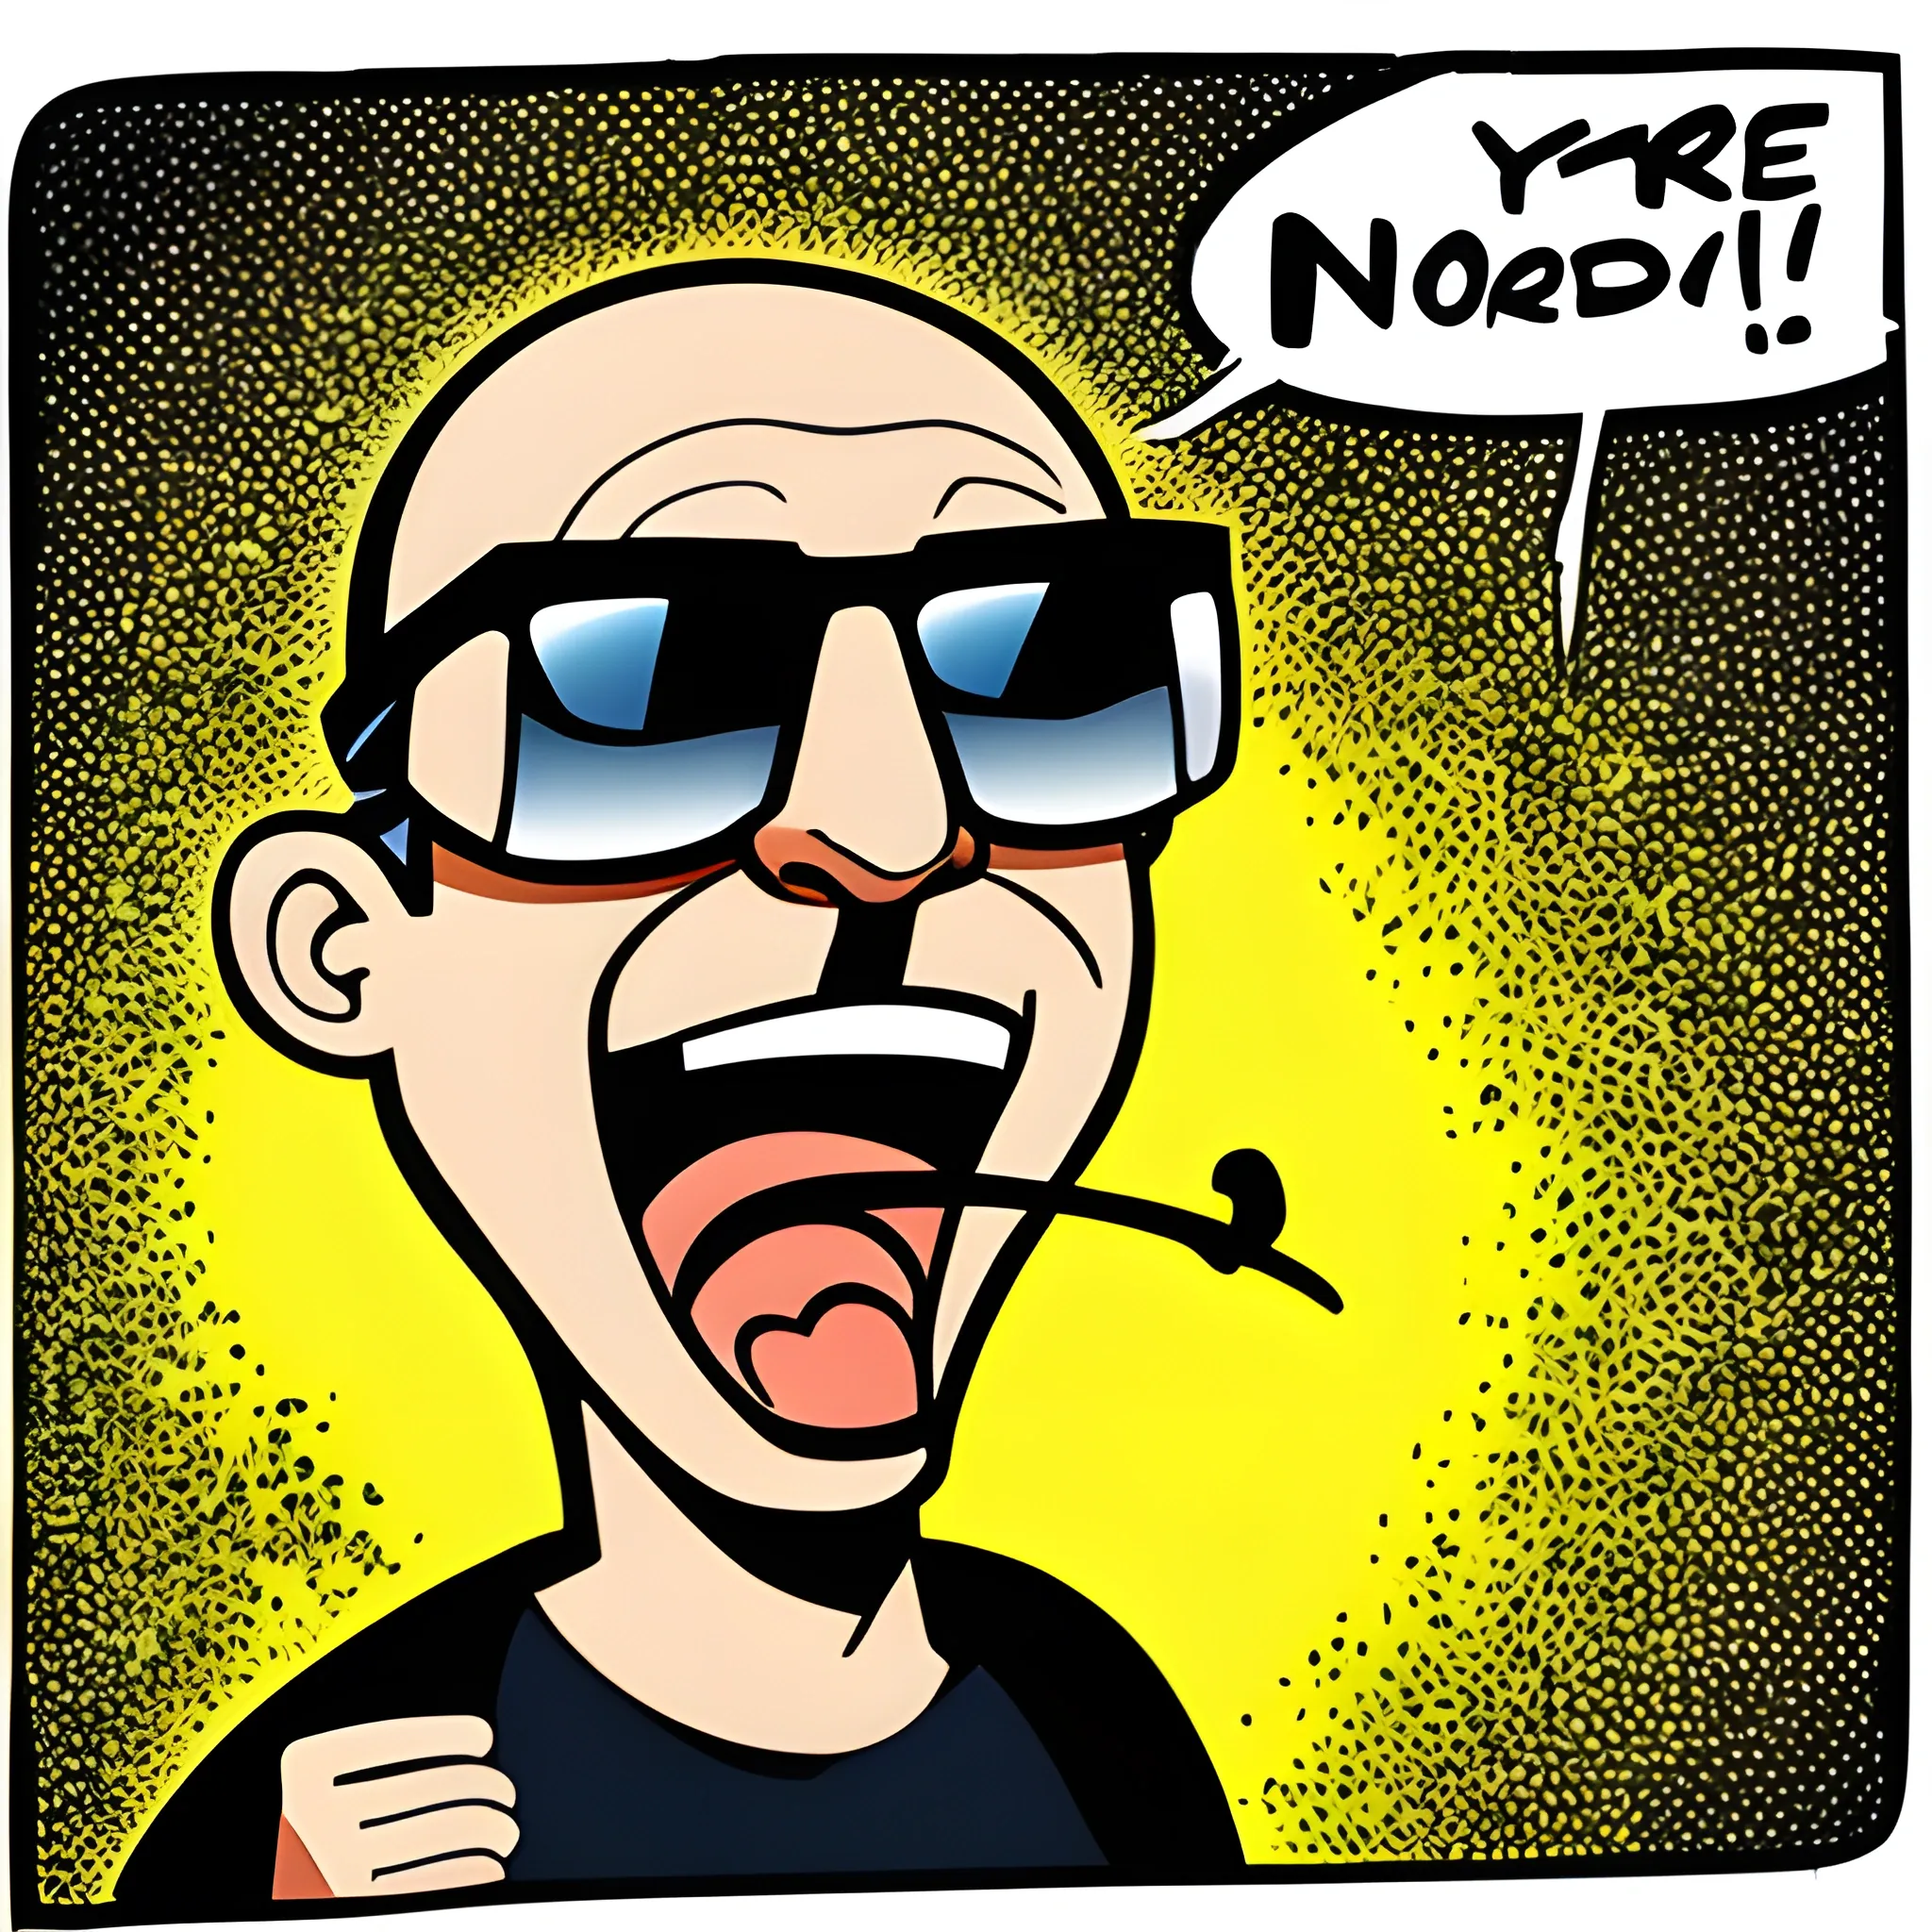 , Cartoon bald guy with sunglasses yelling whats not not